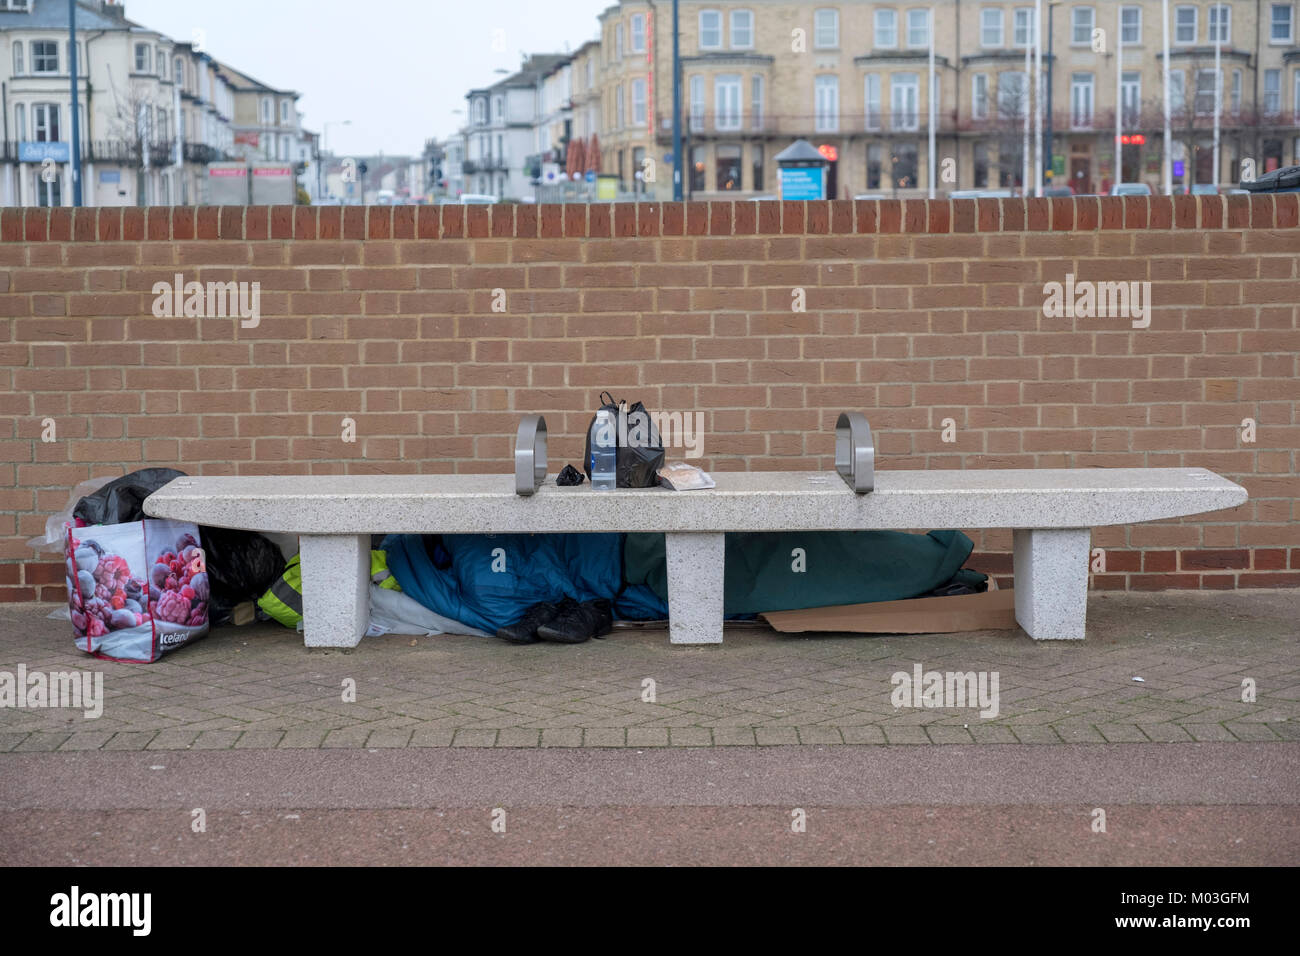 Hidden homeless person with gifts of food and water, sleeps on the pleasure beach promenade, Great Yarmouth UK Stock Photo